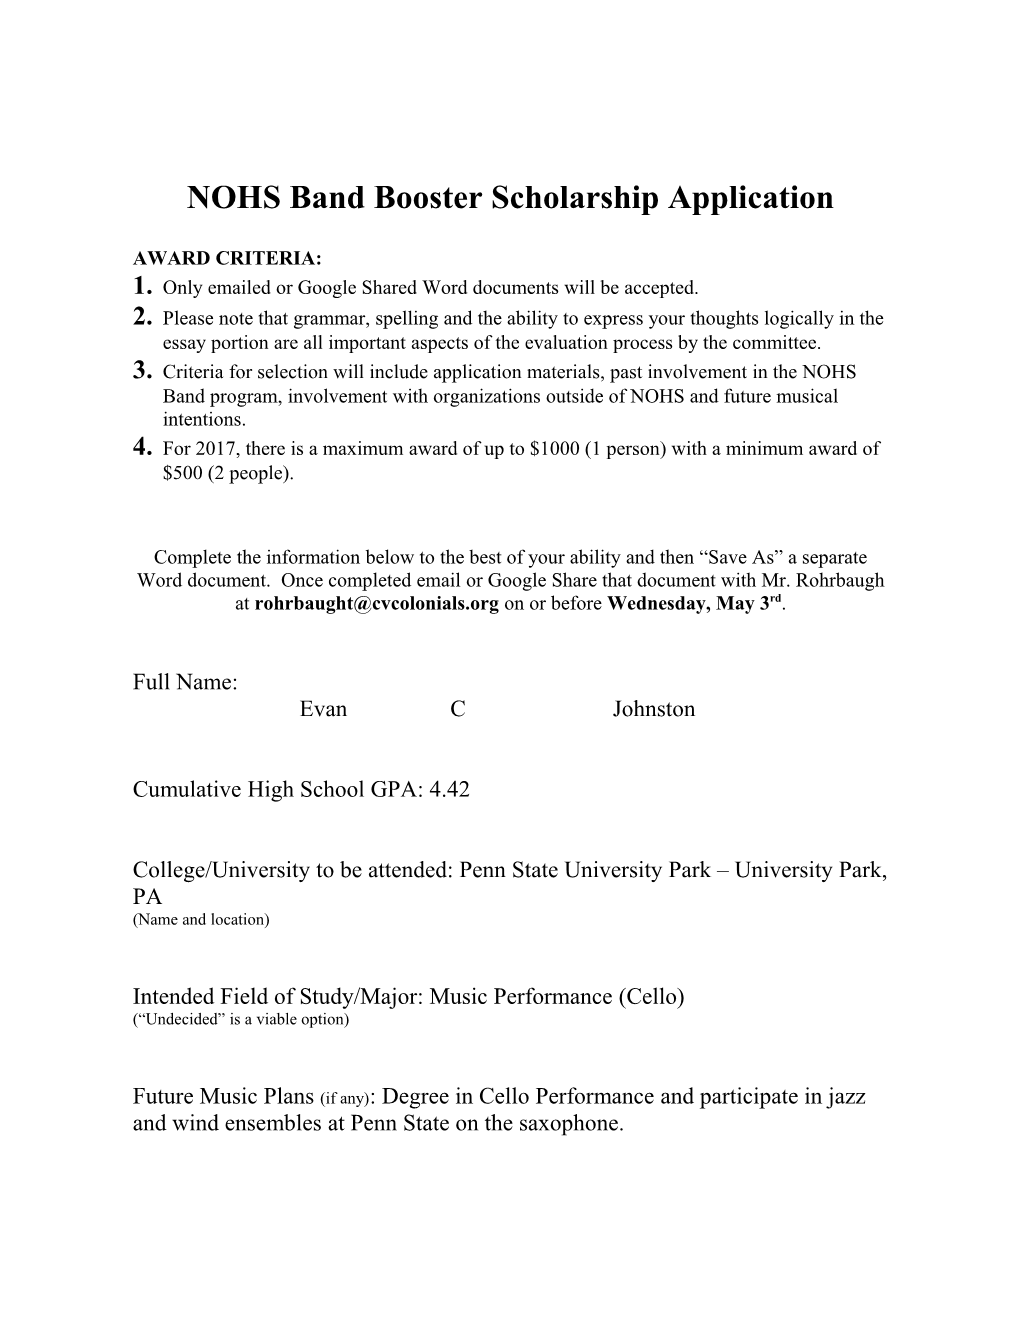 NOHS Band Booster Scholarship Application